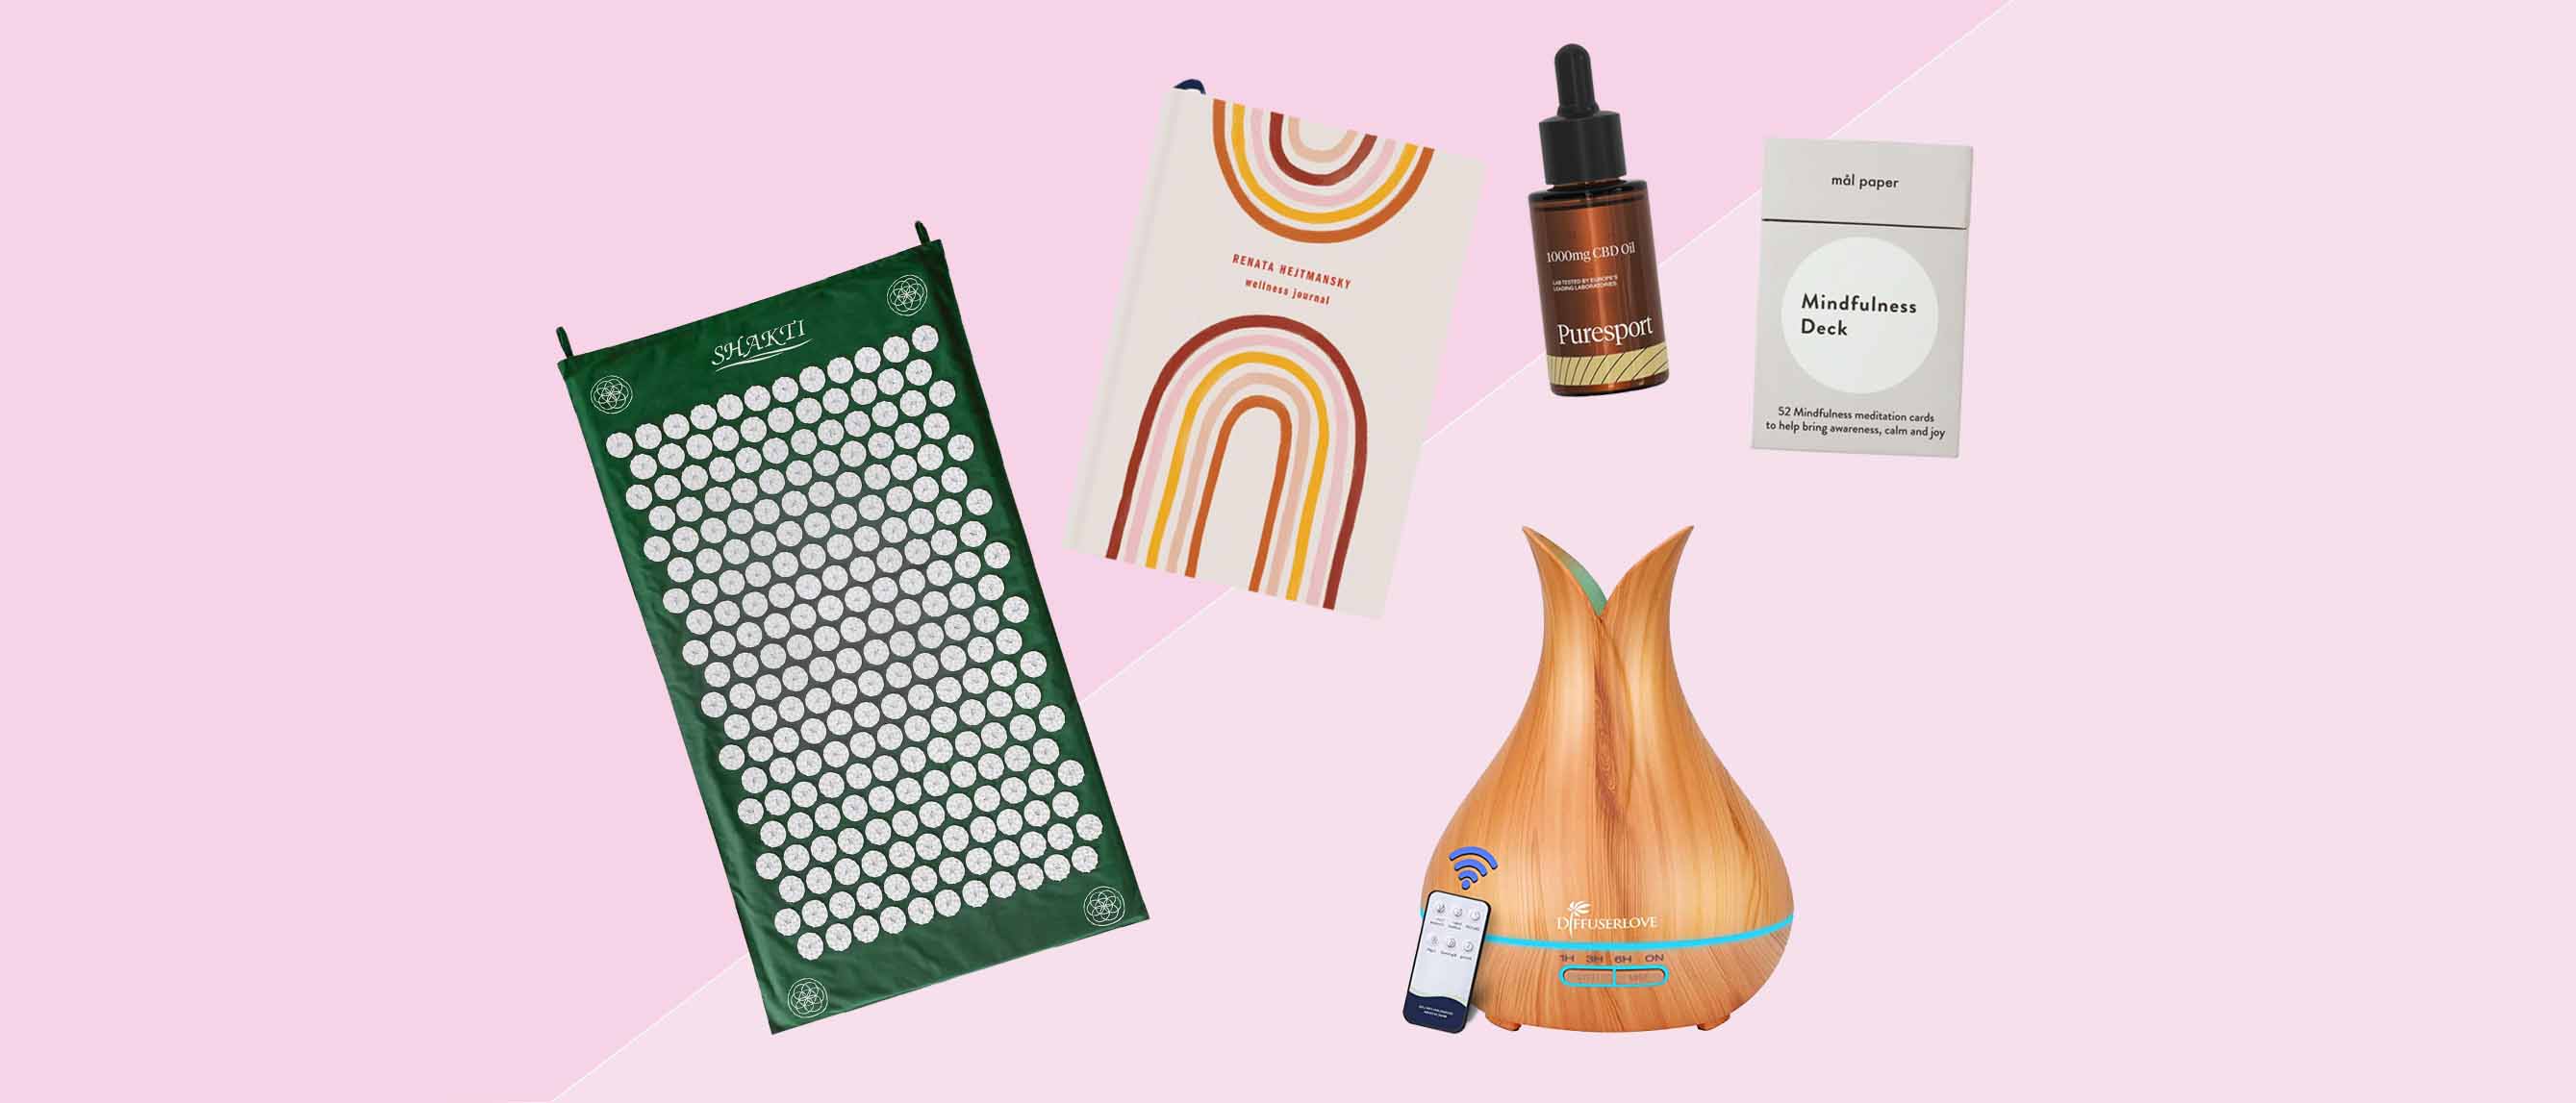 10 Gorgeous Mindfulness Gifts From Small UK Businesses - The Anti